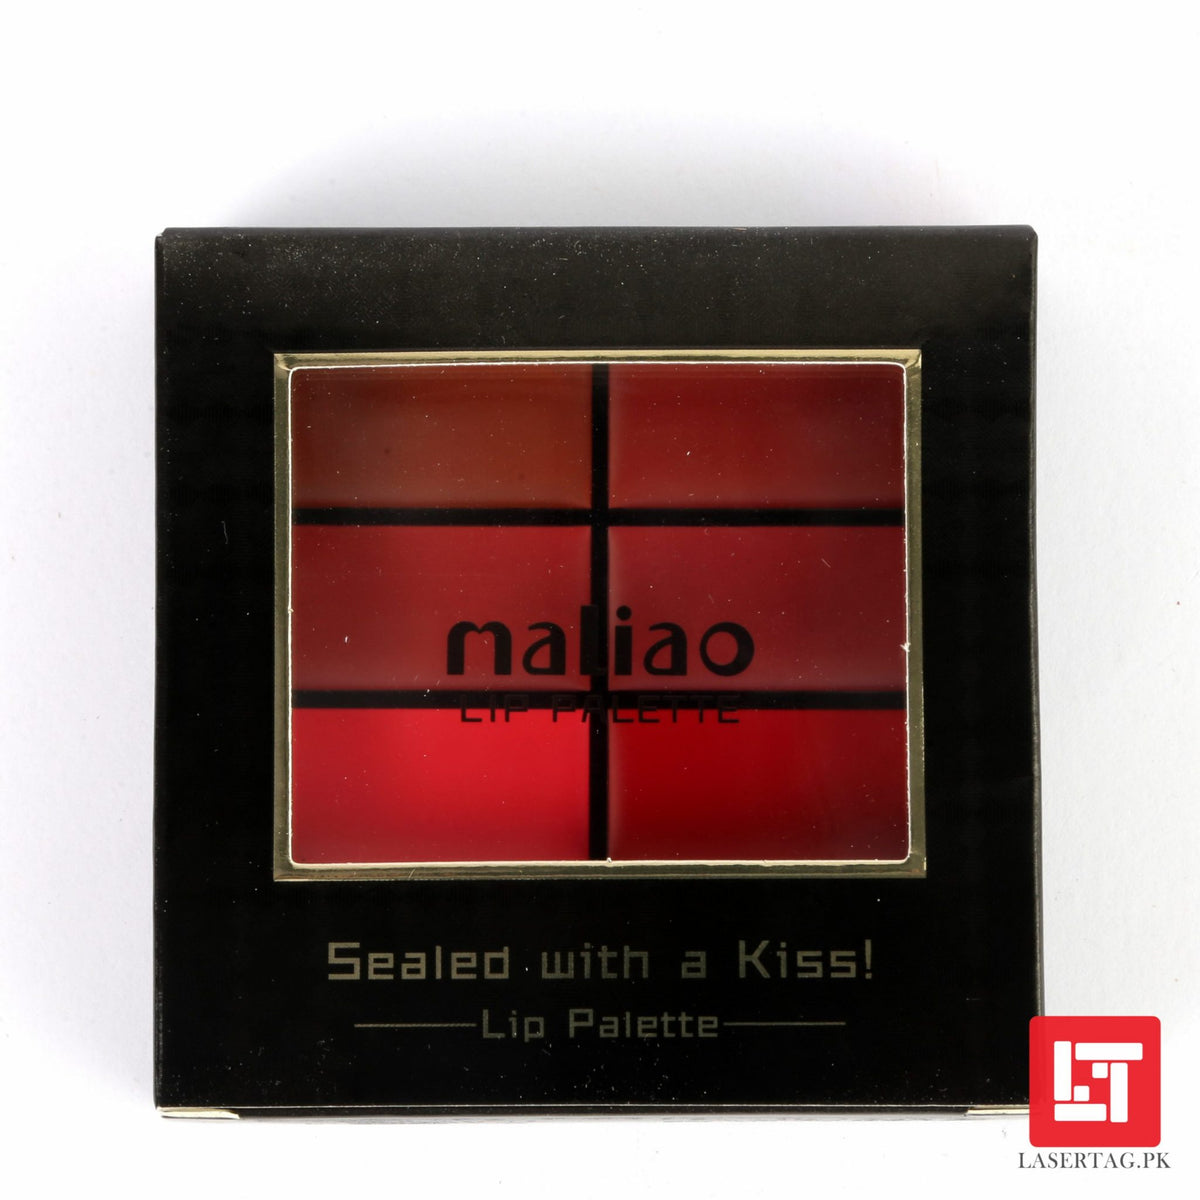 Maliao 6 Color Sealed With A Kiss Lip Palette M180-01 9g freeshipping - lasertag.pk